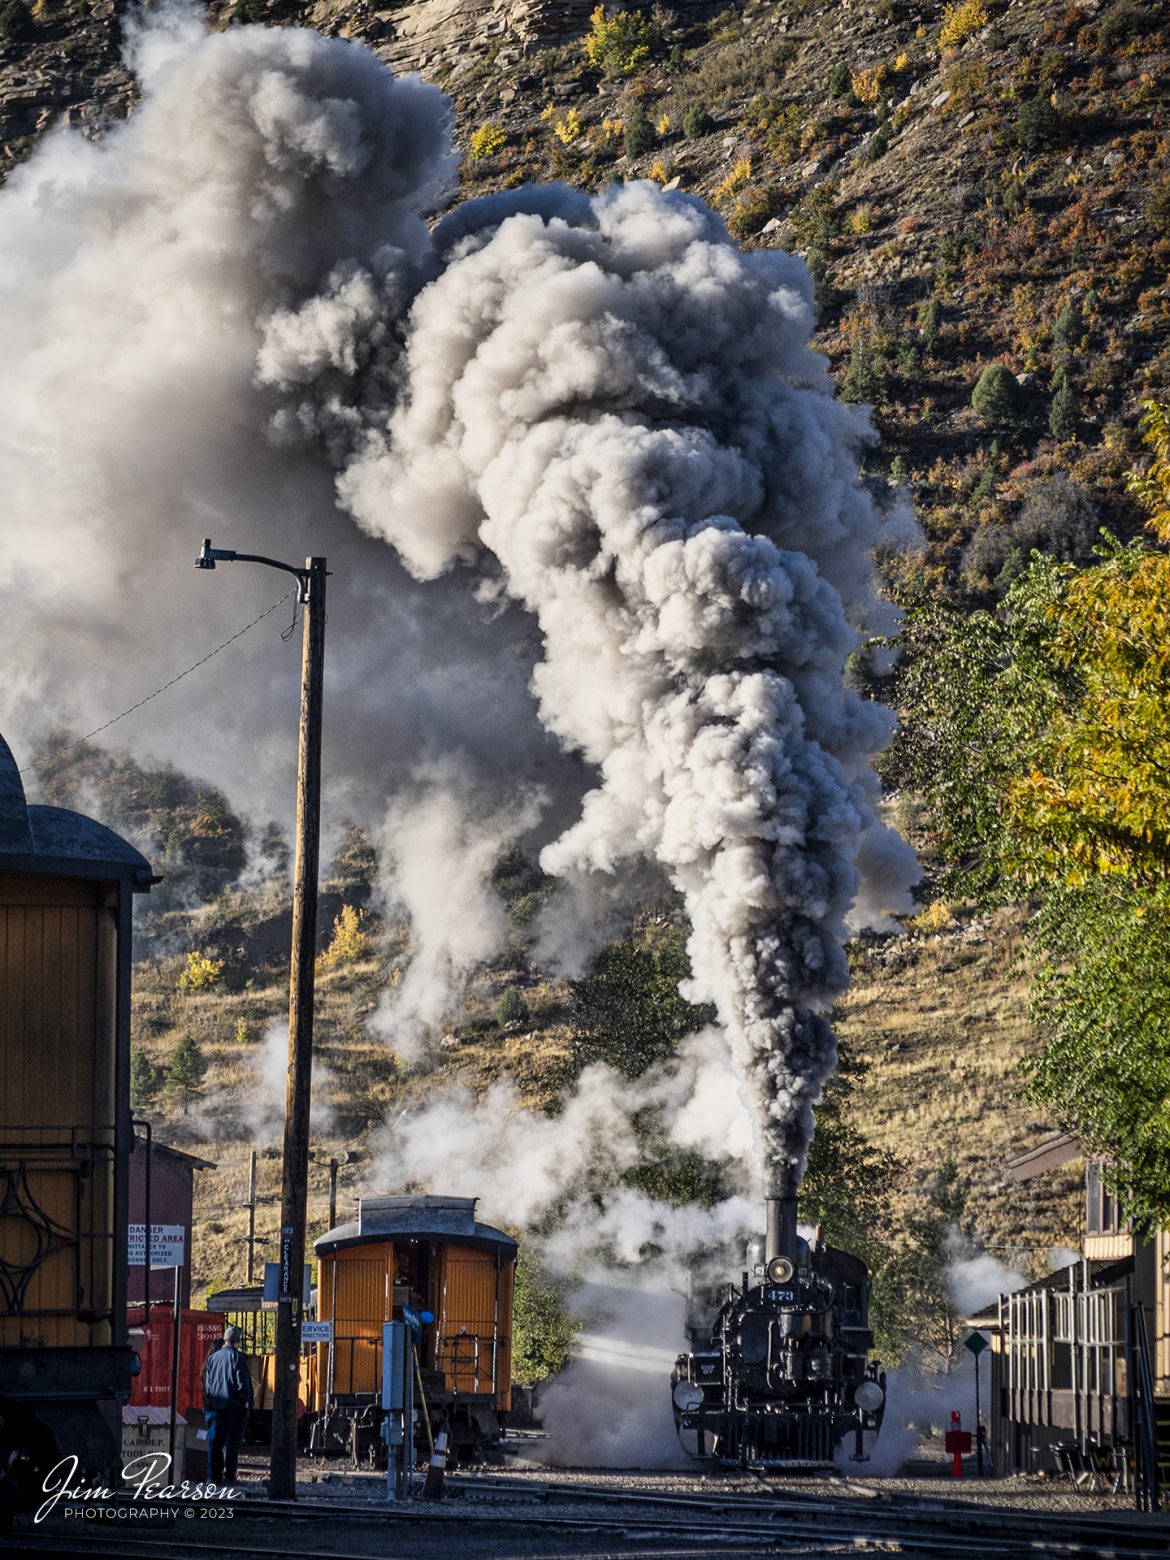 Denver and Rio Grande Western 473 pulls through the yard at Durango, Colorado, on October 15th, 2023, as it prepares to hook up to one of the daily passenger trains, bound for Silverton, CO.

According to Wikipedia: The Durango and Silverton Narrow Gauge Railroad, often abbreviated as the D&SNG, is a 3 ft (914 mm) narrow-gauge heritage railroad that operates on 45.2 mi (72.7 km) of track between Durango and Silverton, in the U.S. state of Colorado. The railway is a federally designated National Historic Landmark and was also designated by the American Society of Civil Engineers as a National Historic Civil Engineering Landmark in 1968.

Tech Info: Nikon D810, RAW, Sigma 24-70 @56mm, f/5.6, 1/500, ISO 110.

railroad, railroads train, trains, best photo. sold photo, railway, railway, sold train photos, sold train pictures, steam trains, rail transport, railroad engines, pictures of trains, pictures of railways, best train photograph, best photo, photography of trains, steam train photography, sold picture, best sold picture, Jim Pearson Photography, Durango and Silverton Railroad